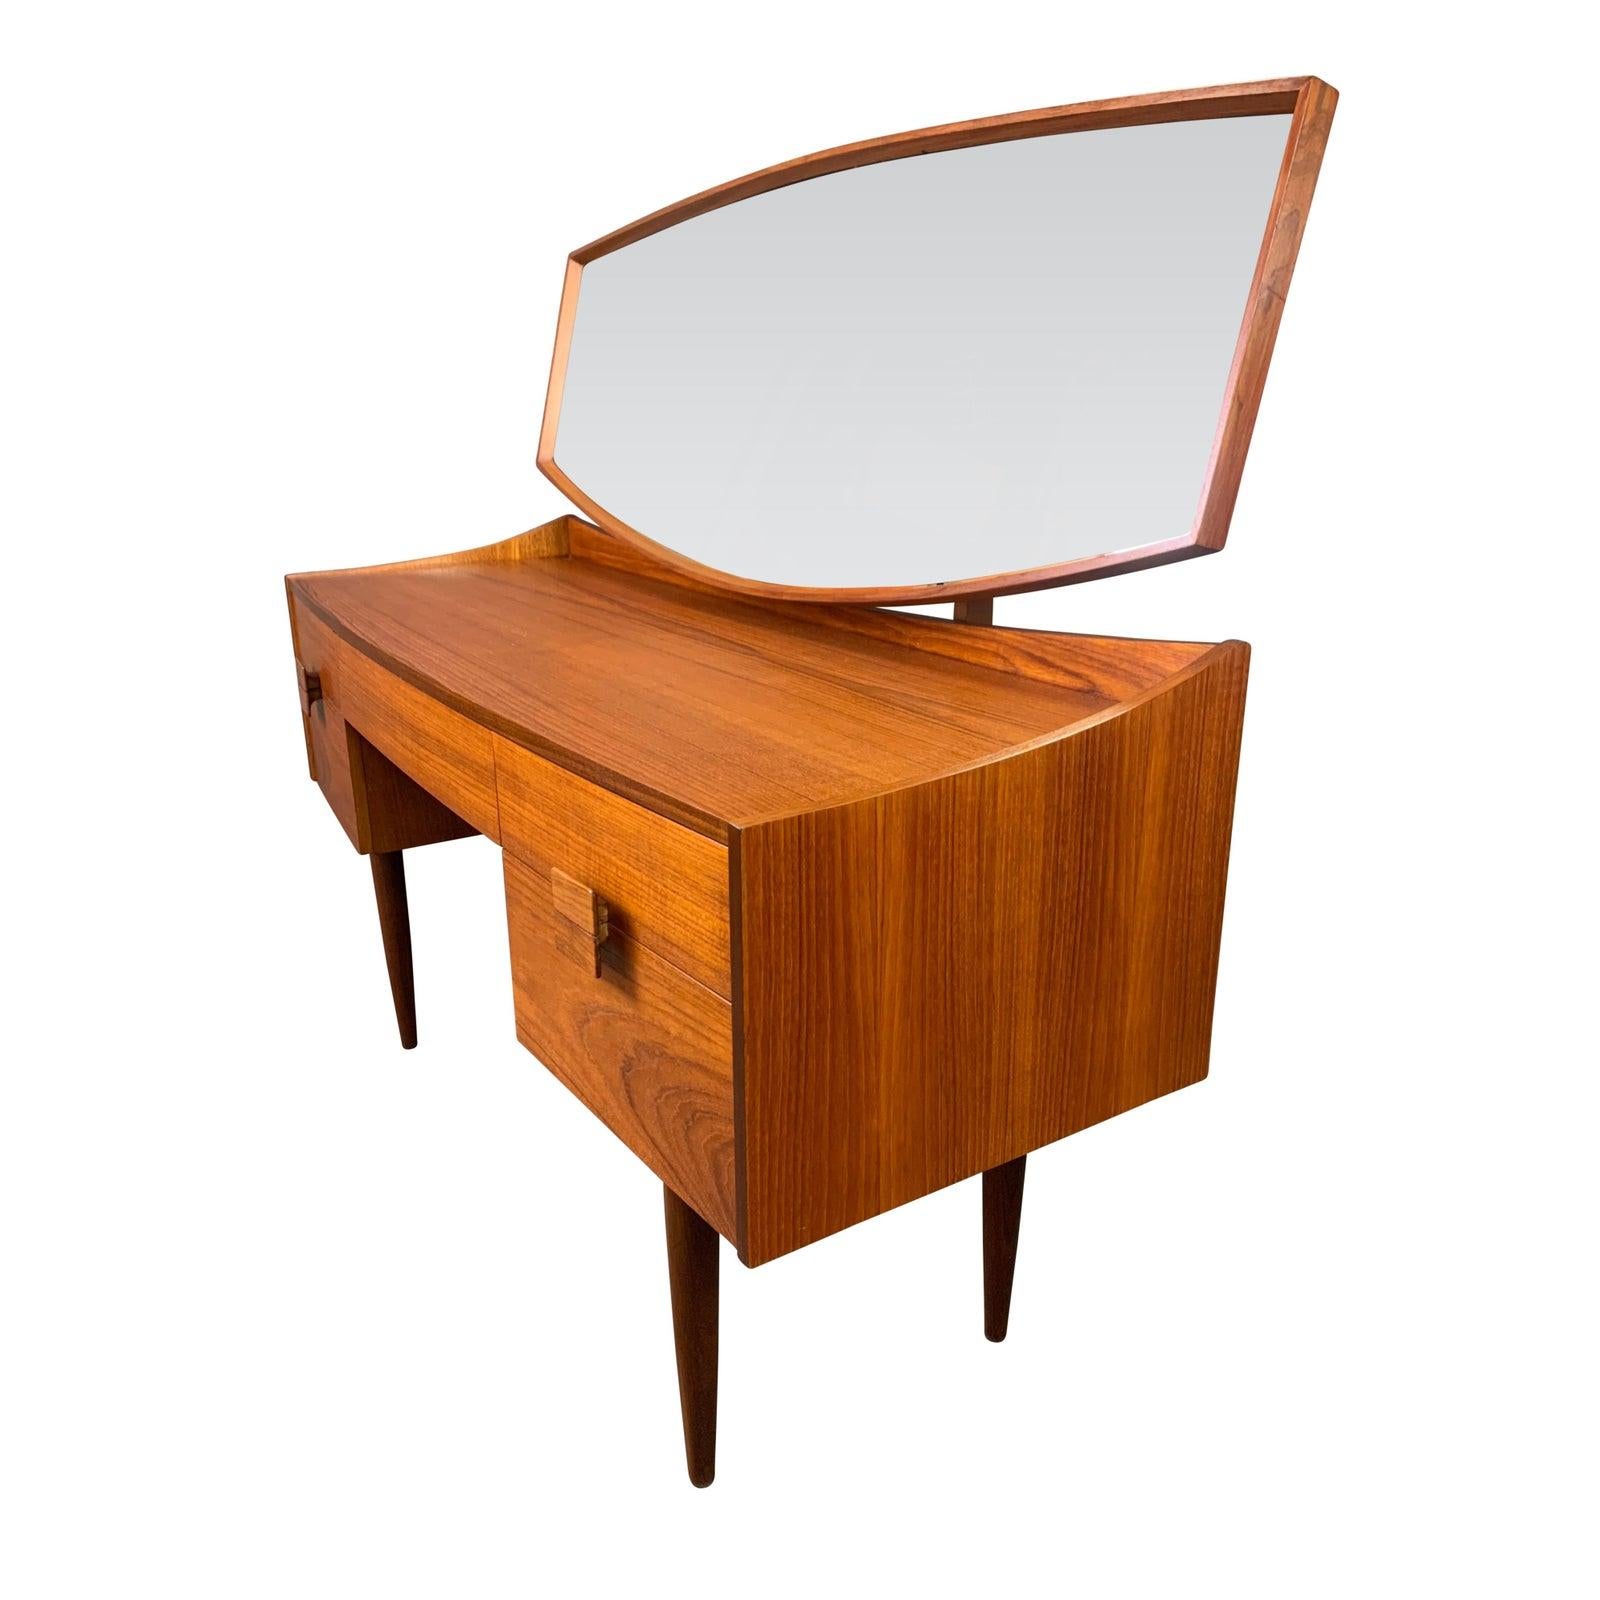 Here is a rare British MCM teak dressing table and its mirror designed by master Ib Kofod Larsen part of the sought after 